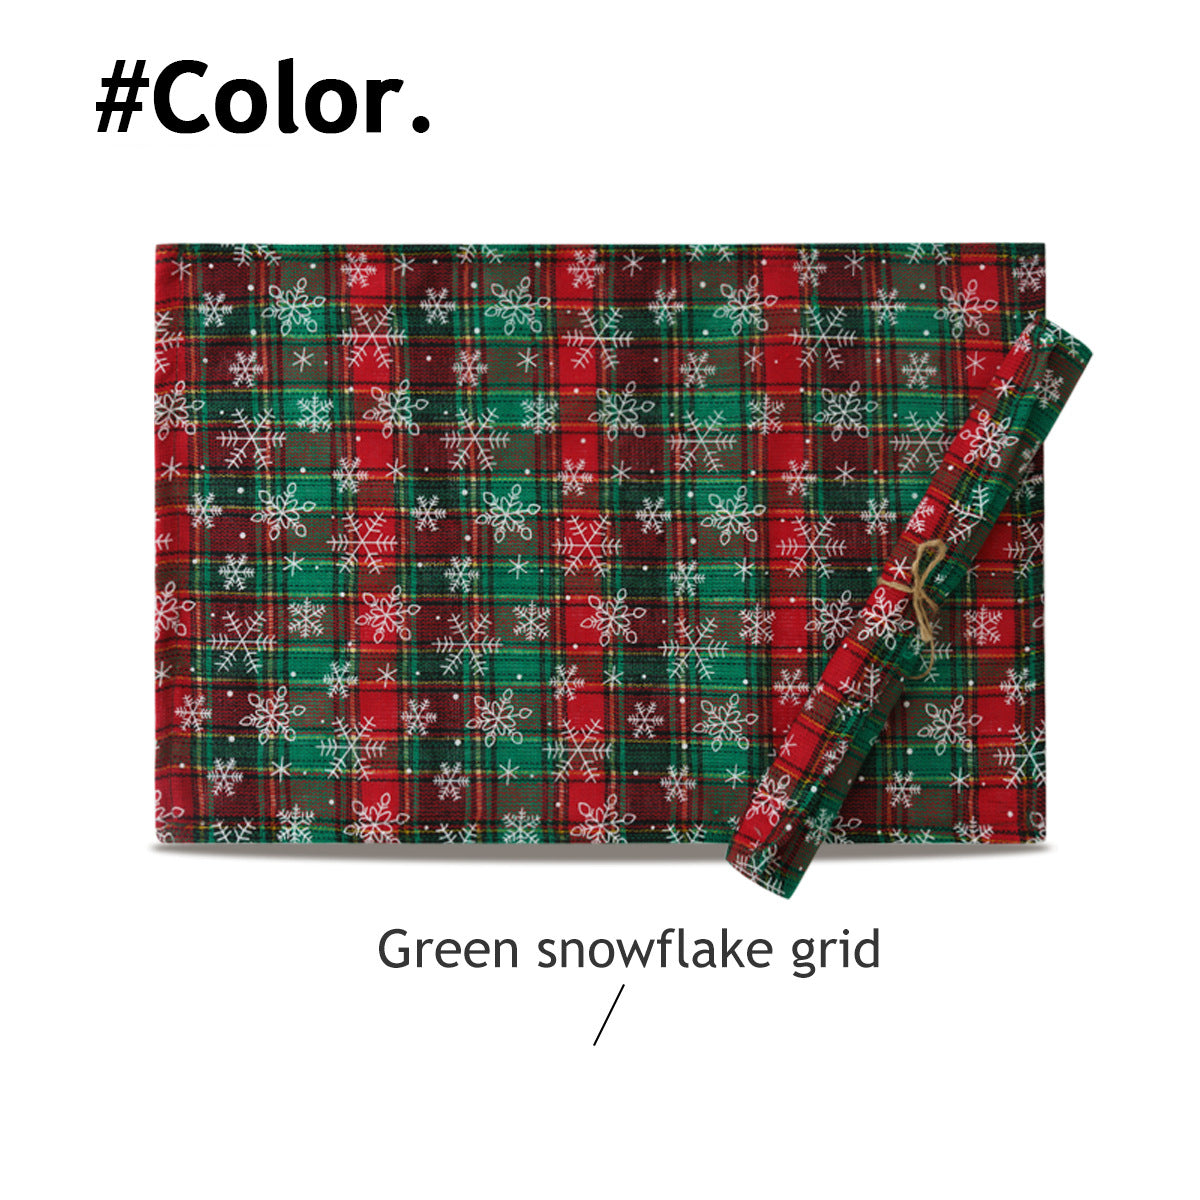 Christmas Series New Year Cloth Plaid Table Flag Insulation Pad, Outdoor and Indoor Christmas decorations Items, Christmas ornaments, Christmas tree decorations, salt dough ornaments, Christmas window decorations, cheap Christmas decorations, snowmen, and ornaments.